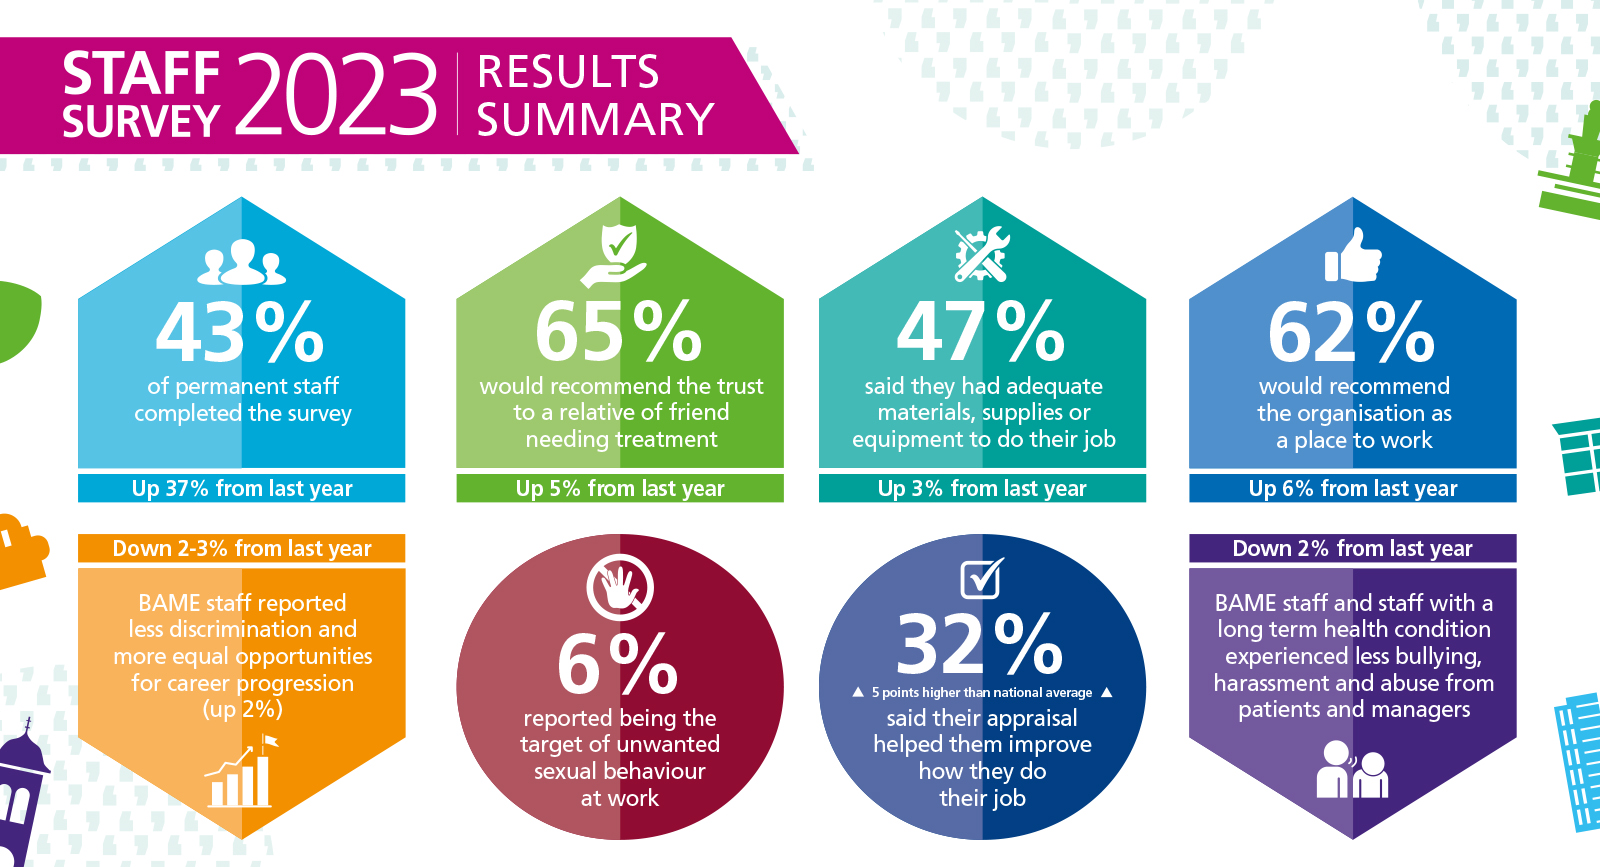 This infographic highlights the key achievements from the 2023 NHS staff survey